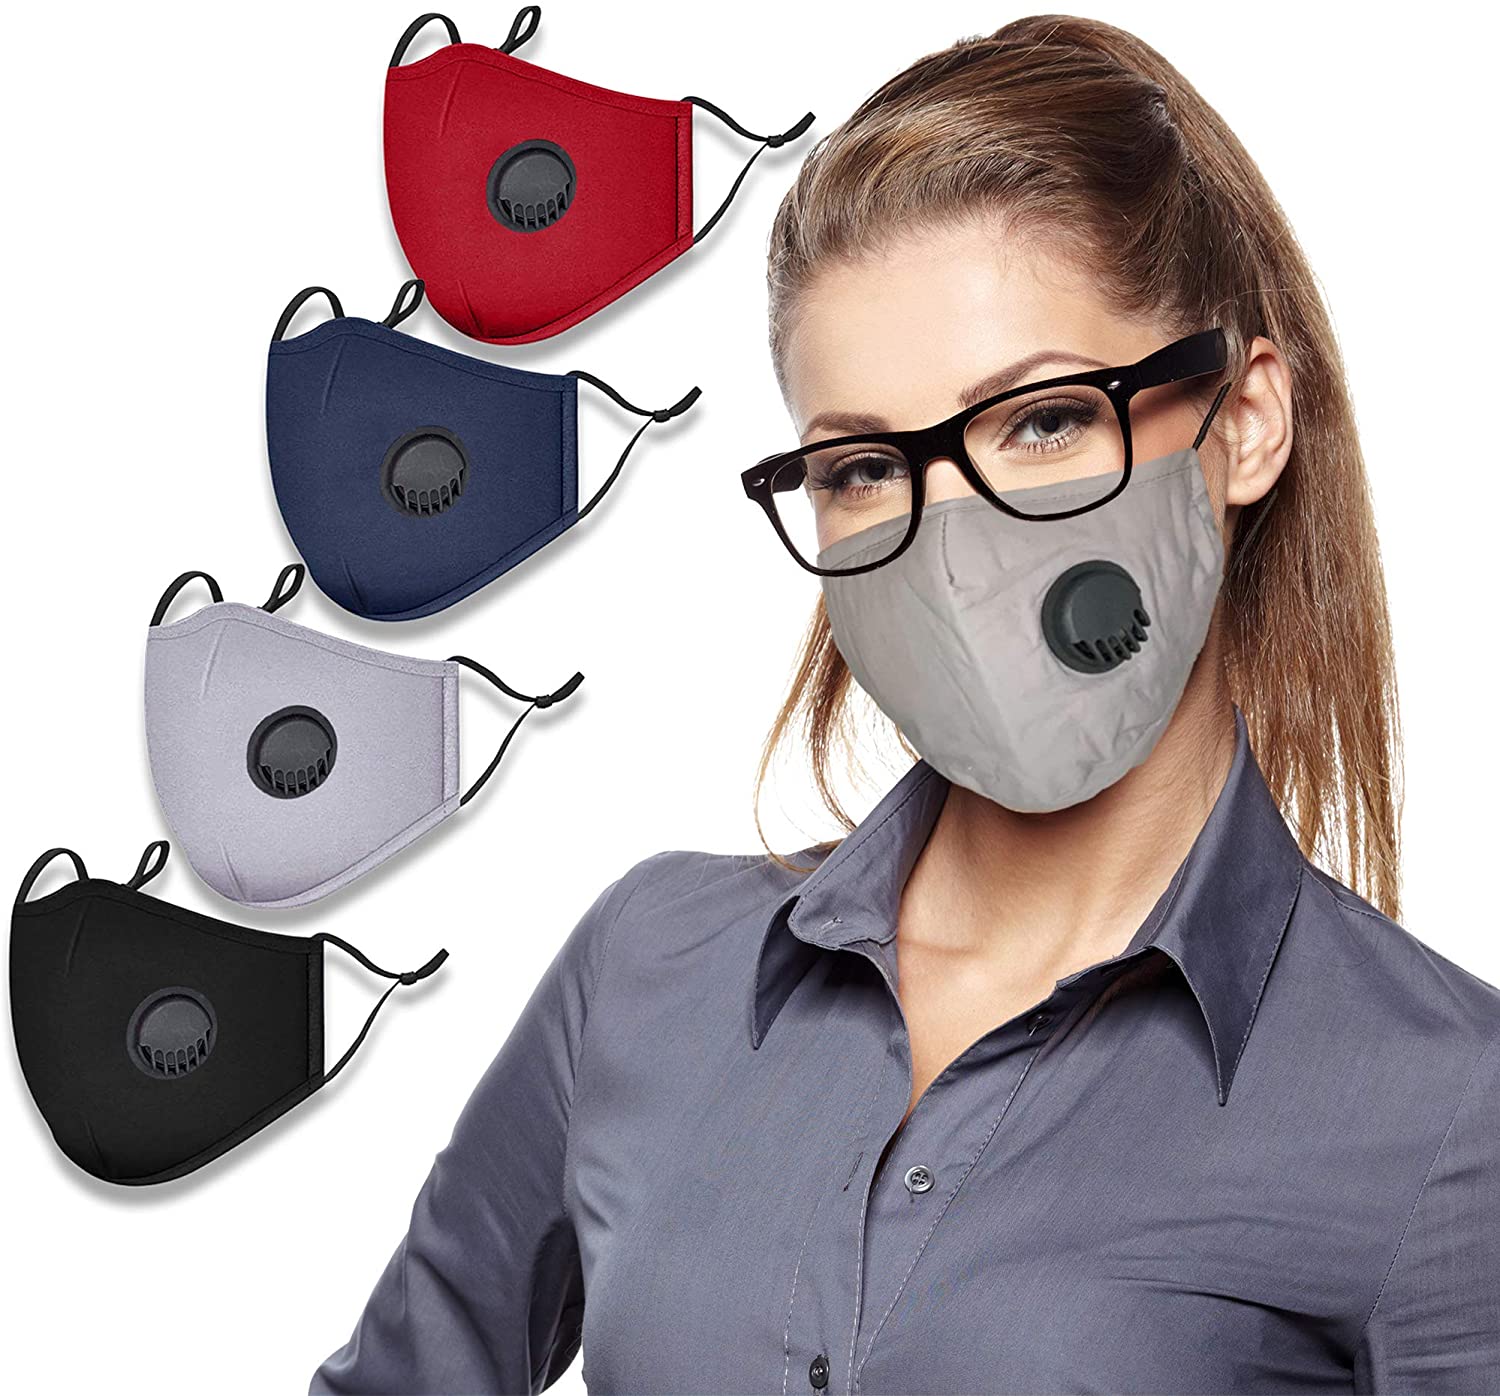 GreenHug Face Covering with Breathing Valve and PM2.5 Activated Carbon Filter, washable and reusable. Anti-dust and anti-pollution, for sport and outdoor activity. Adjustable straps